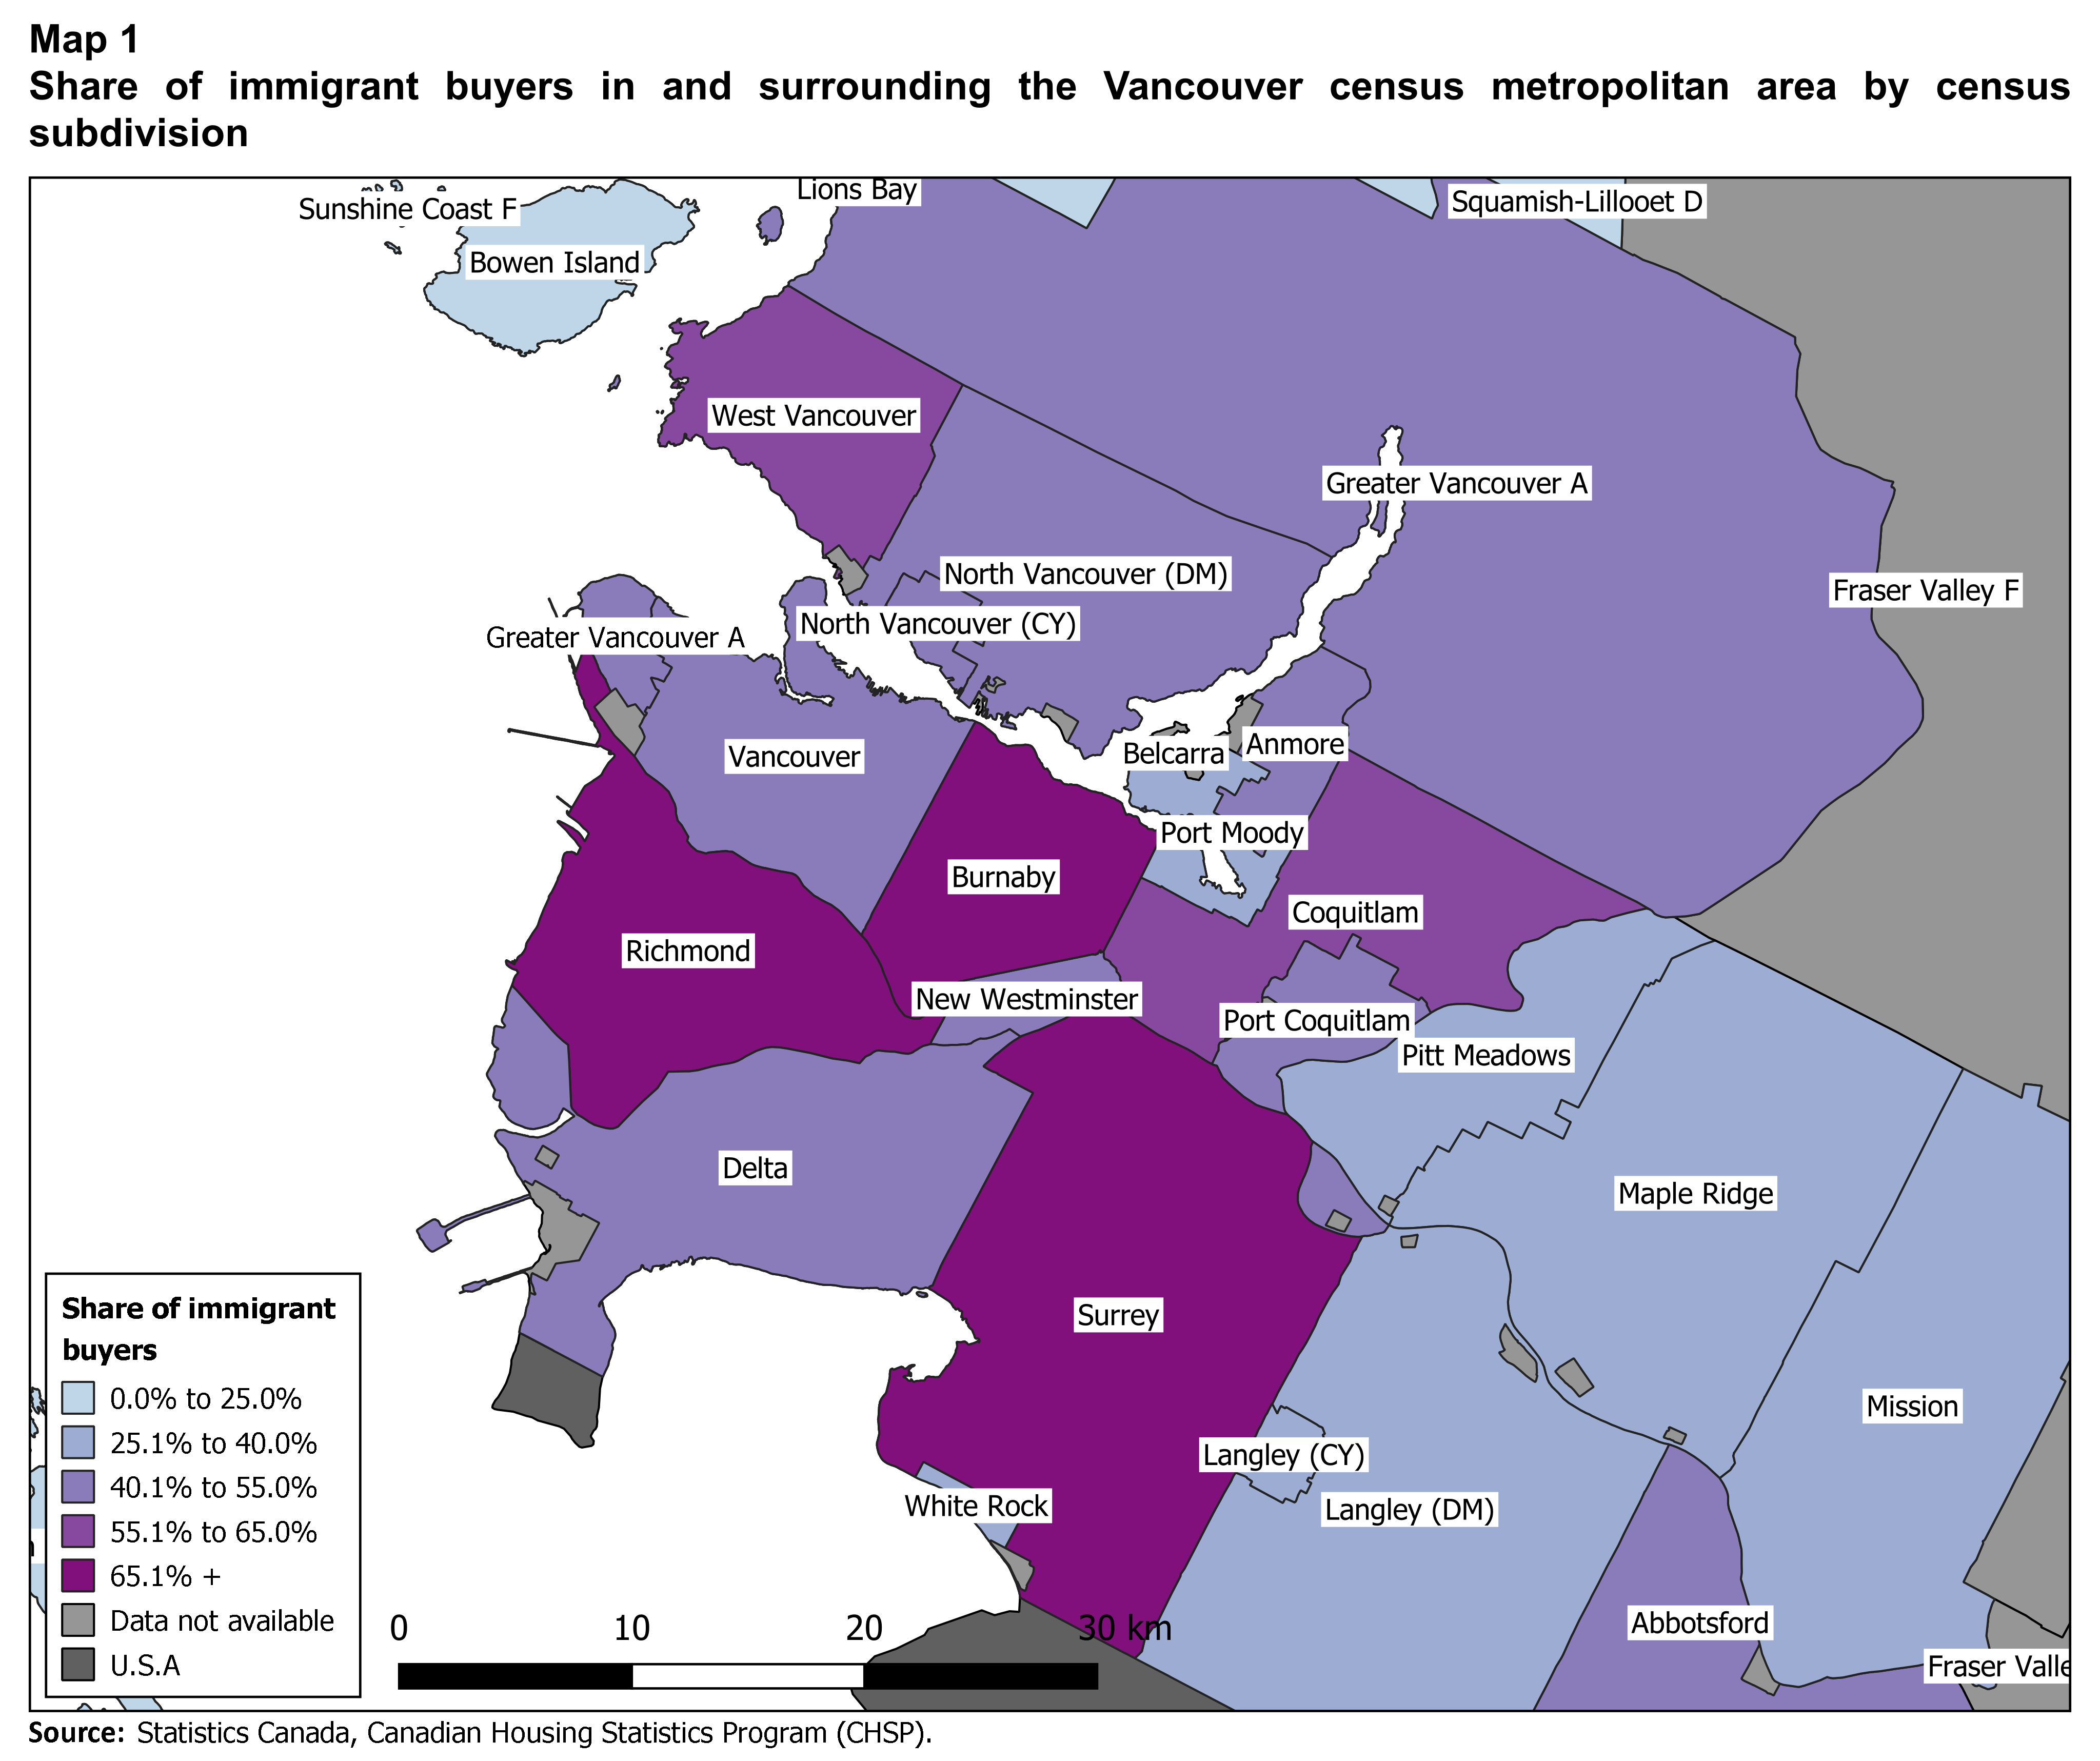 Map 1. Share of immigrant buyers in and surrounding the Vancouver census metropolitan area by census
subdivision